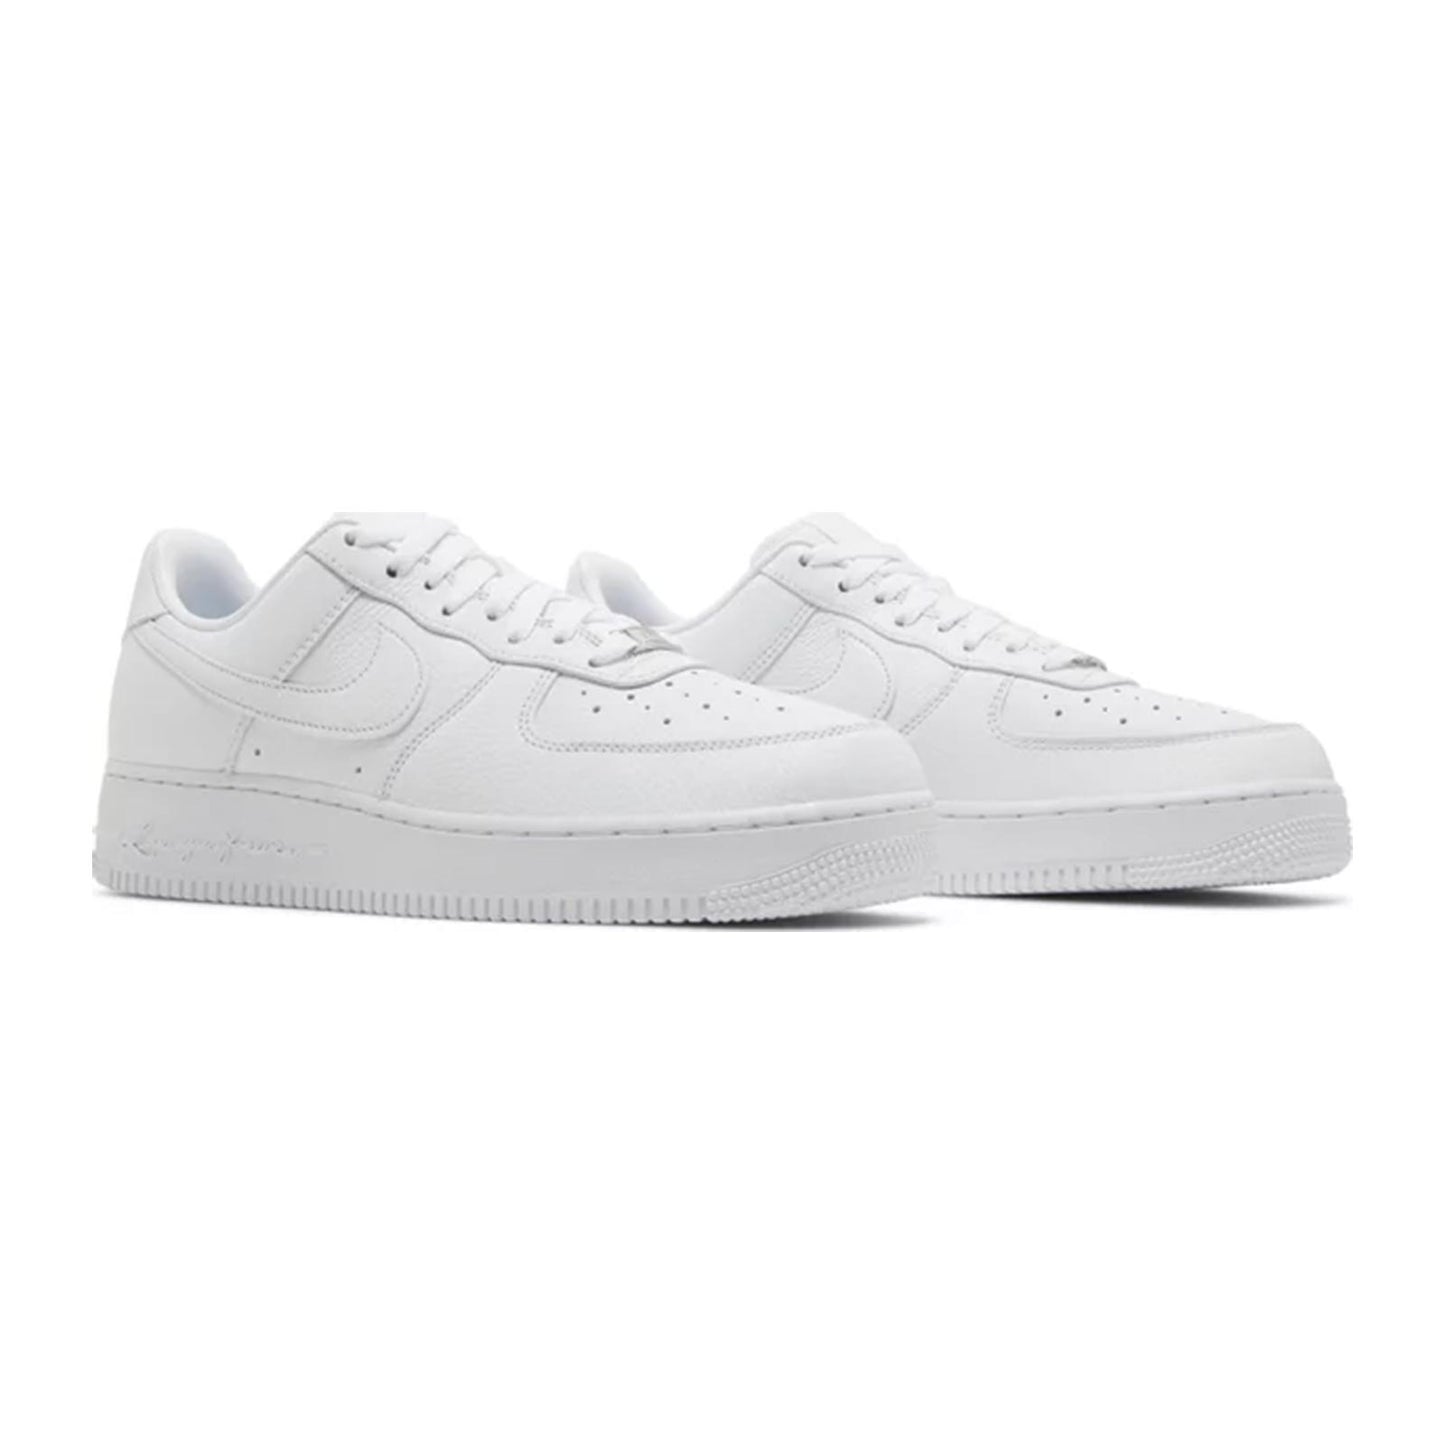 NOCTA x Air Force 1 Low, Certified Lover Boy